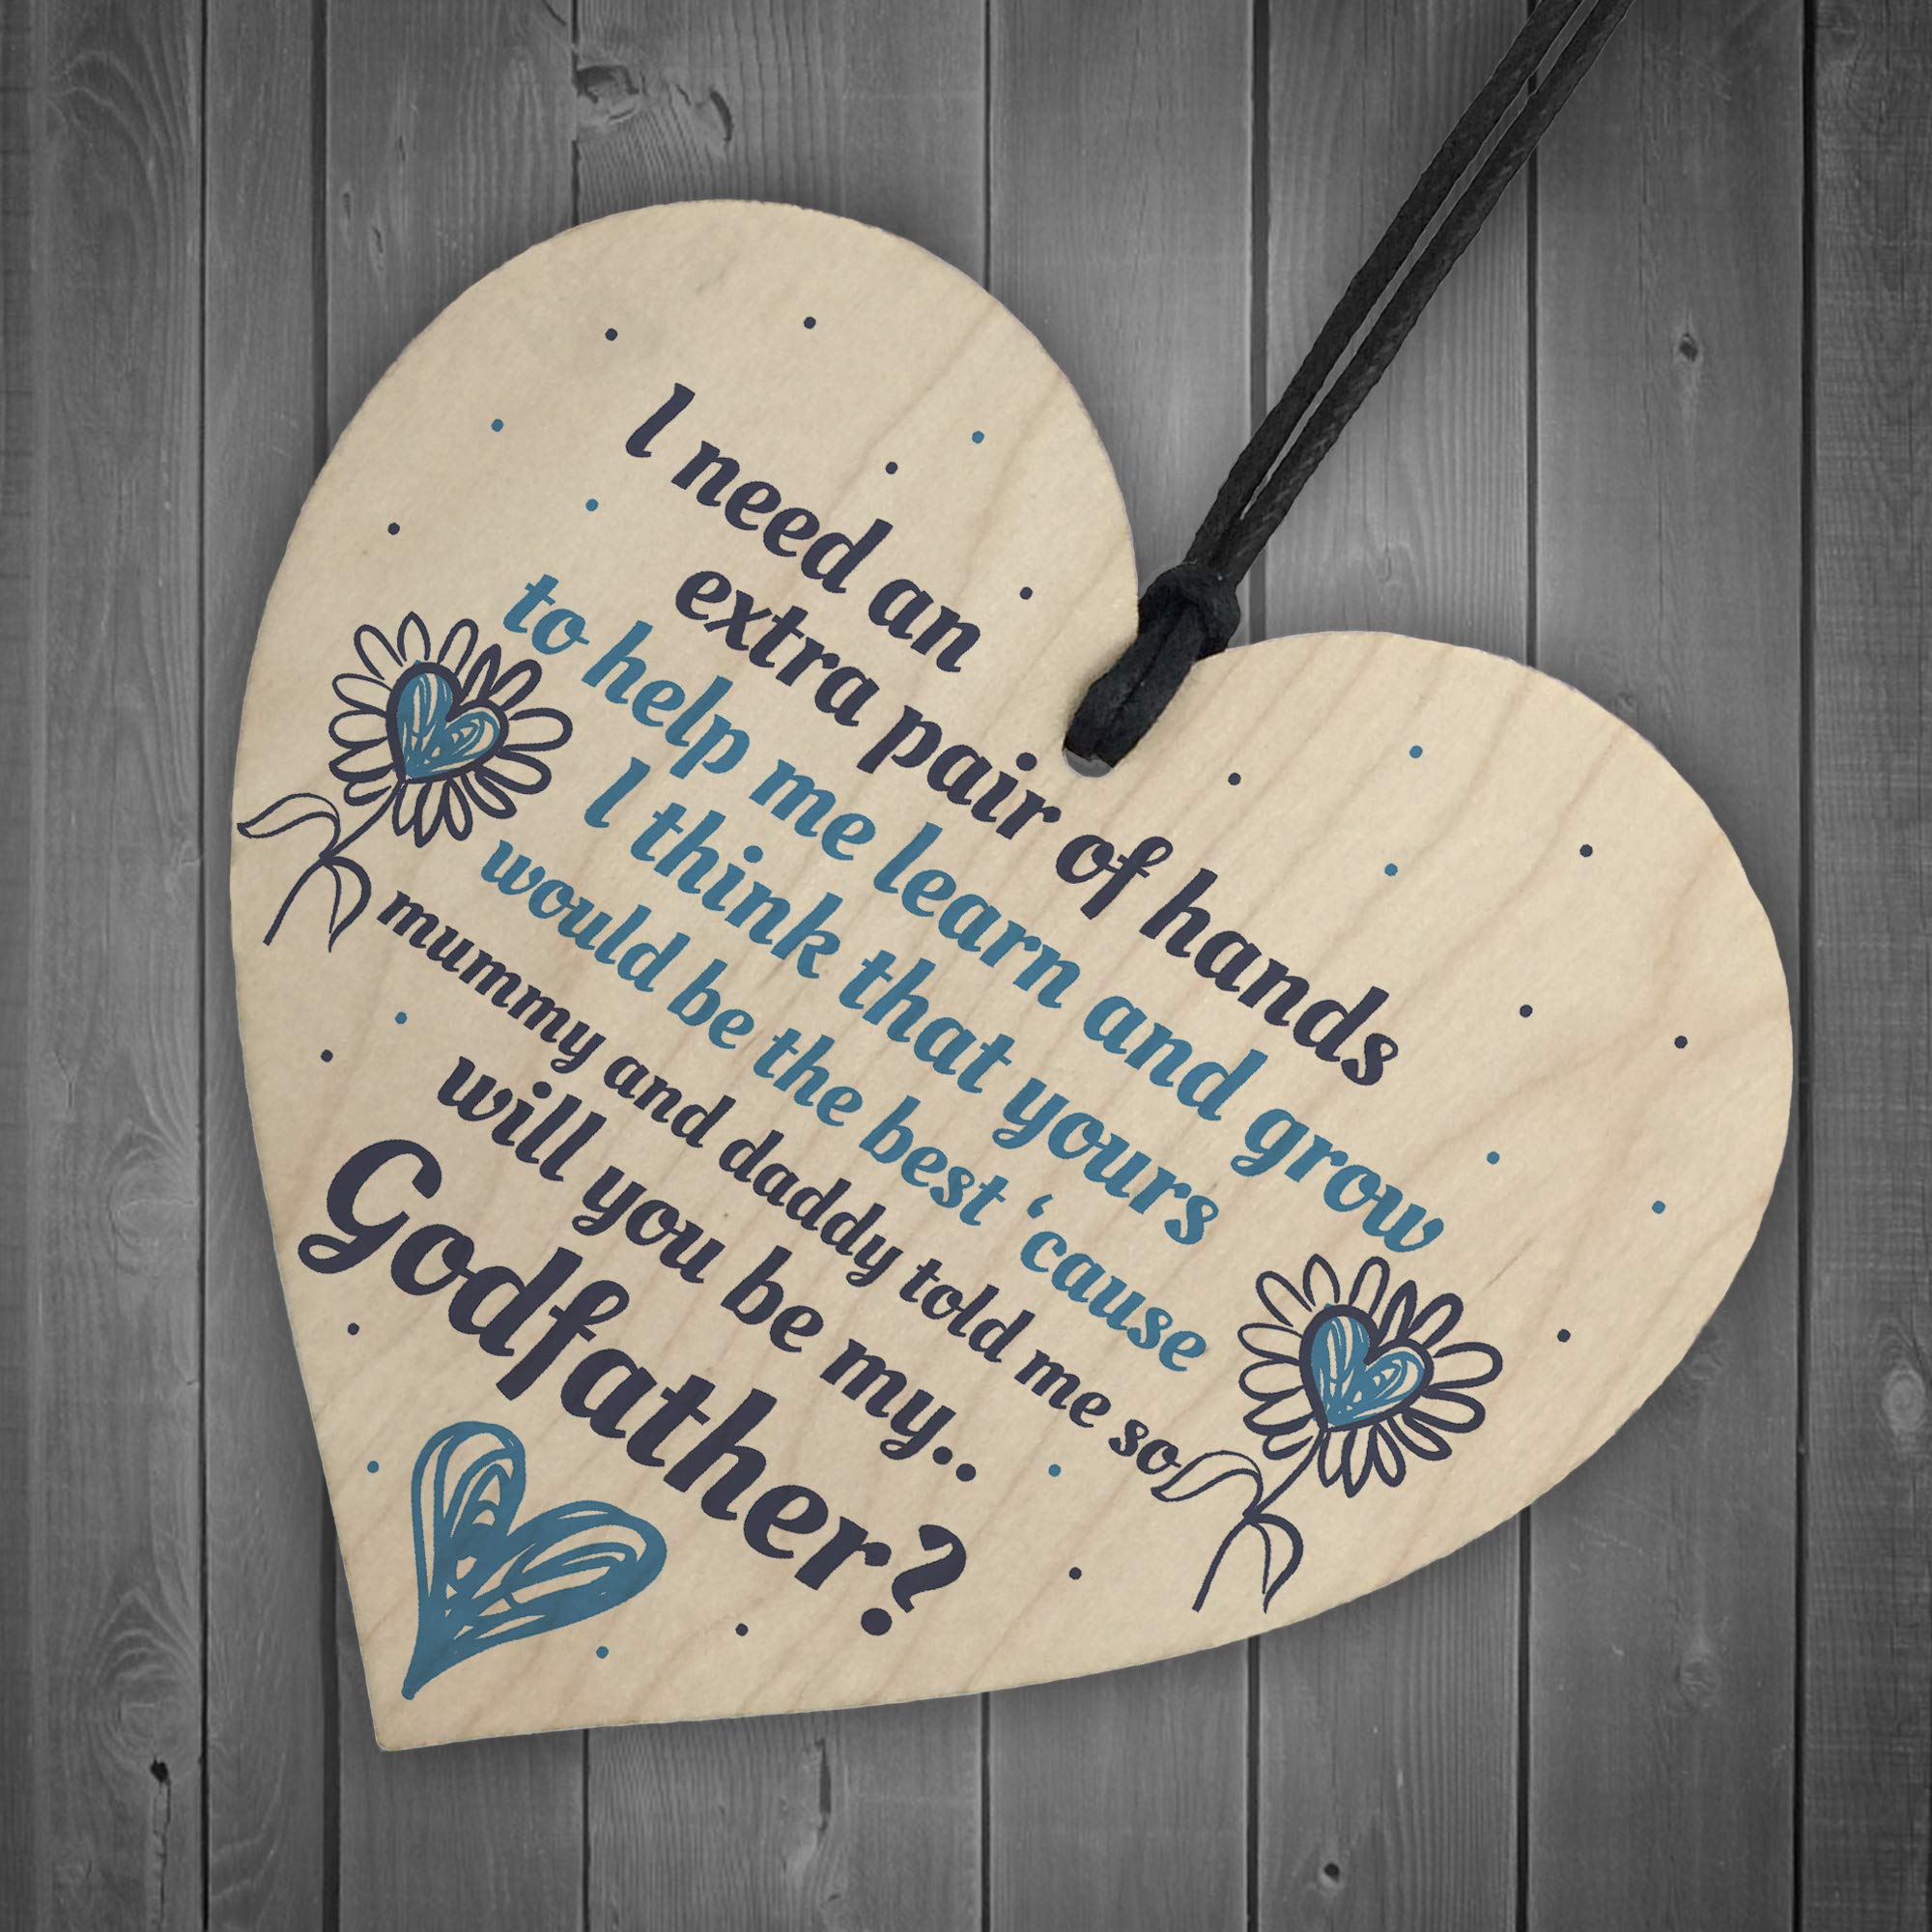 RED OCEAN GODMOTHER GODFATHER Will You Be My Godfather Wooden Heart Plaque Goddaughter Godson Christening Asking Gifts